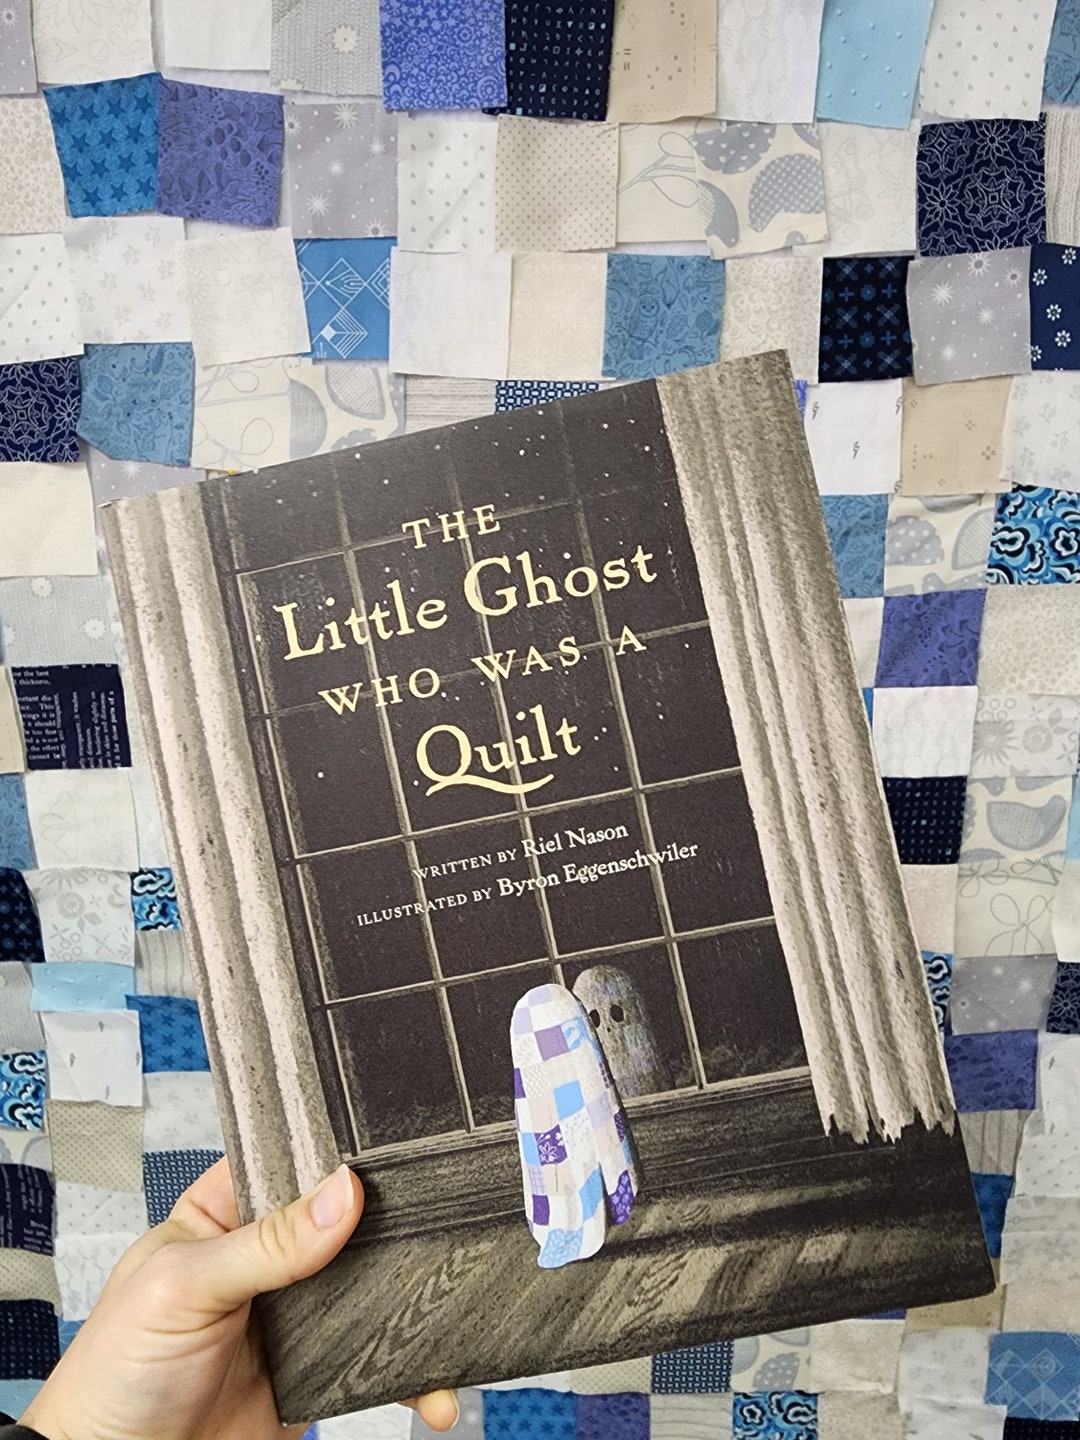 The Little Ghost Who Was a Quilt - Quiltfolk